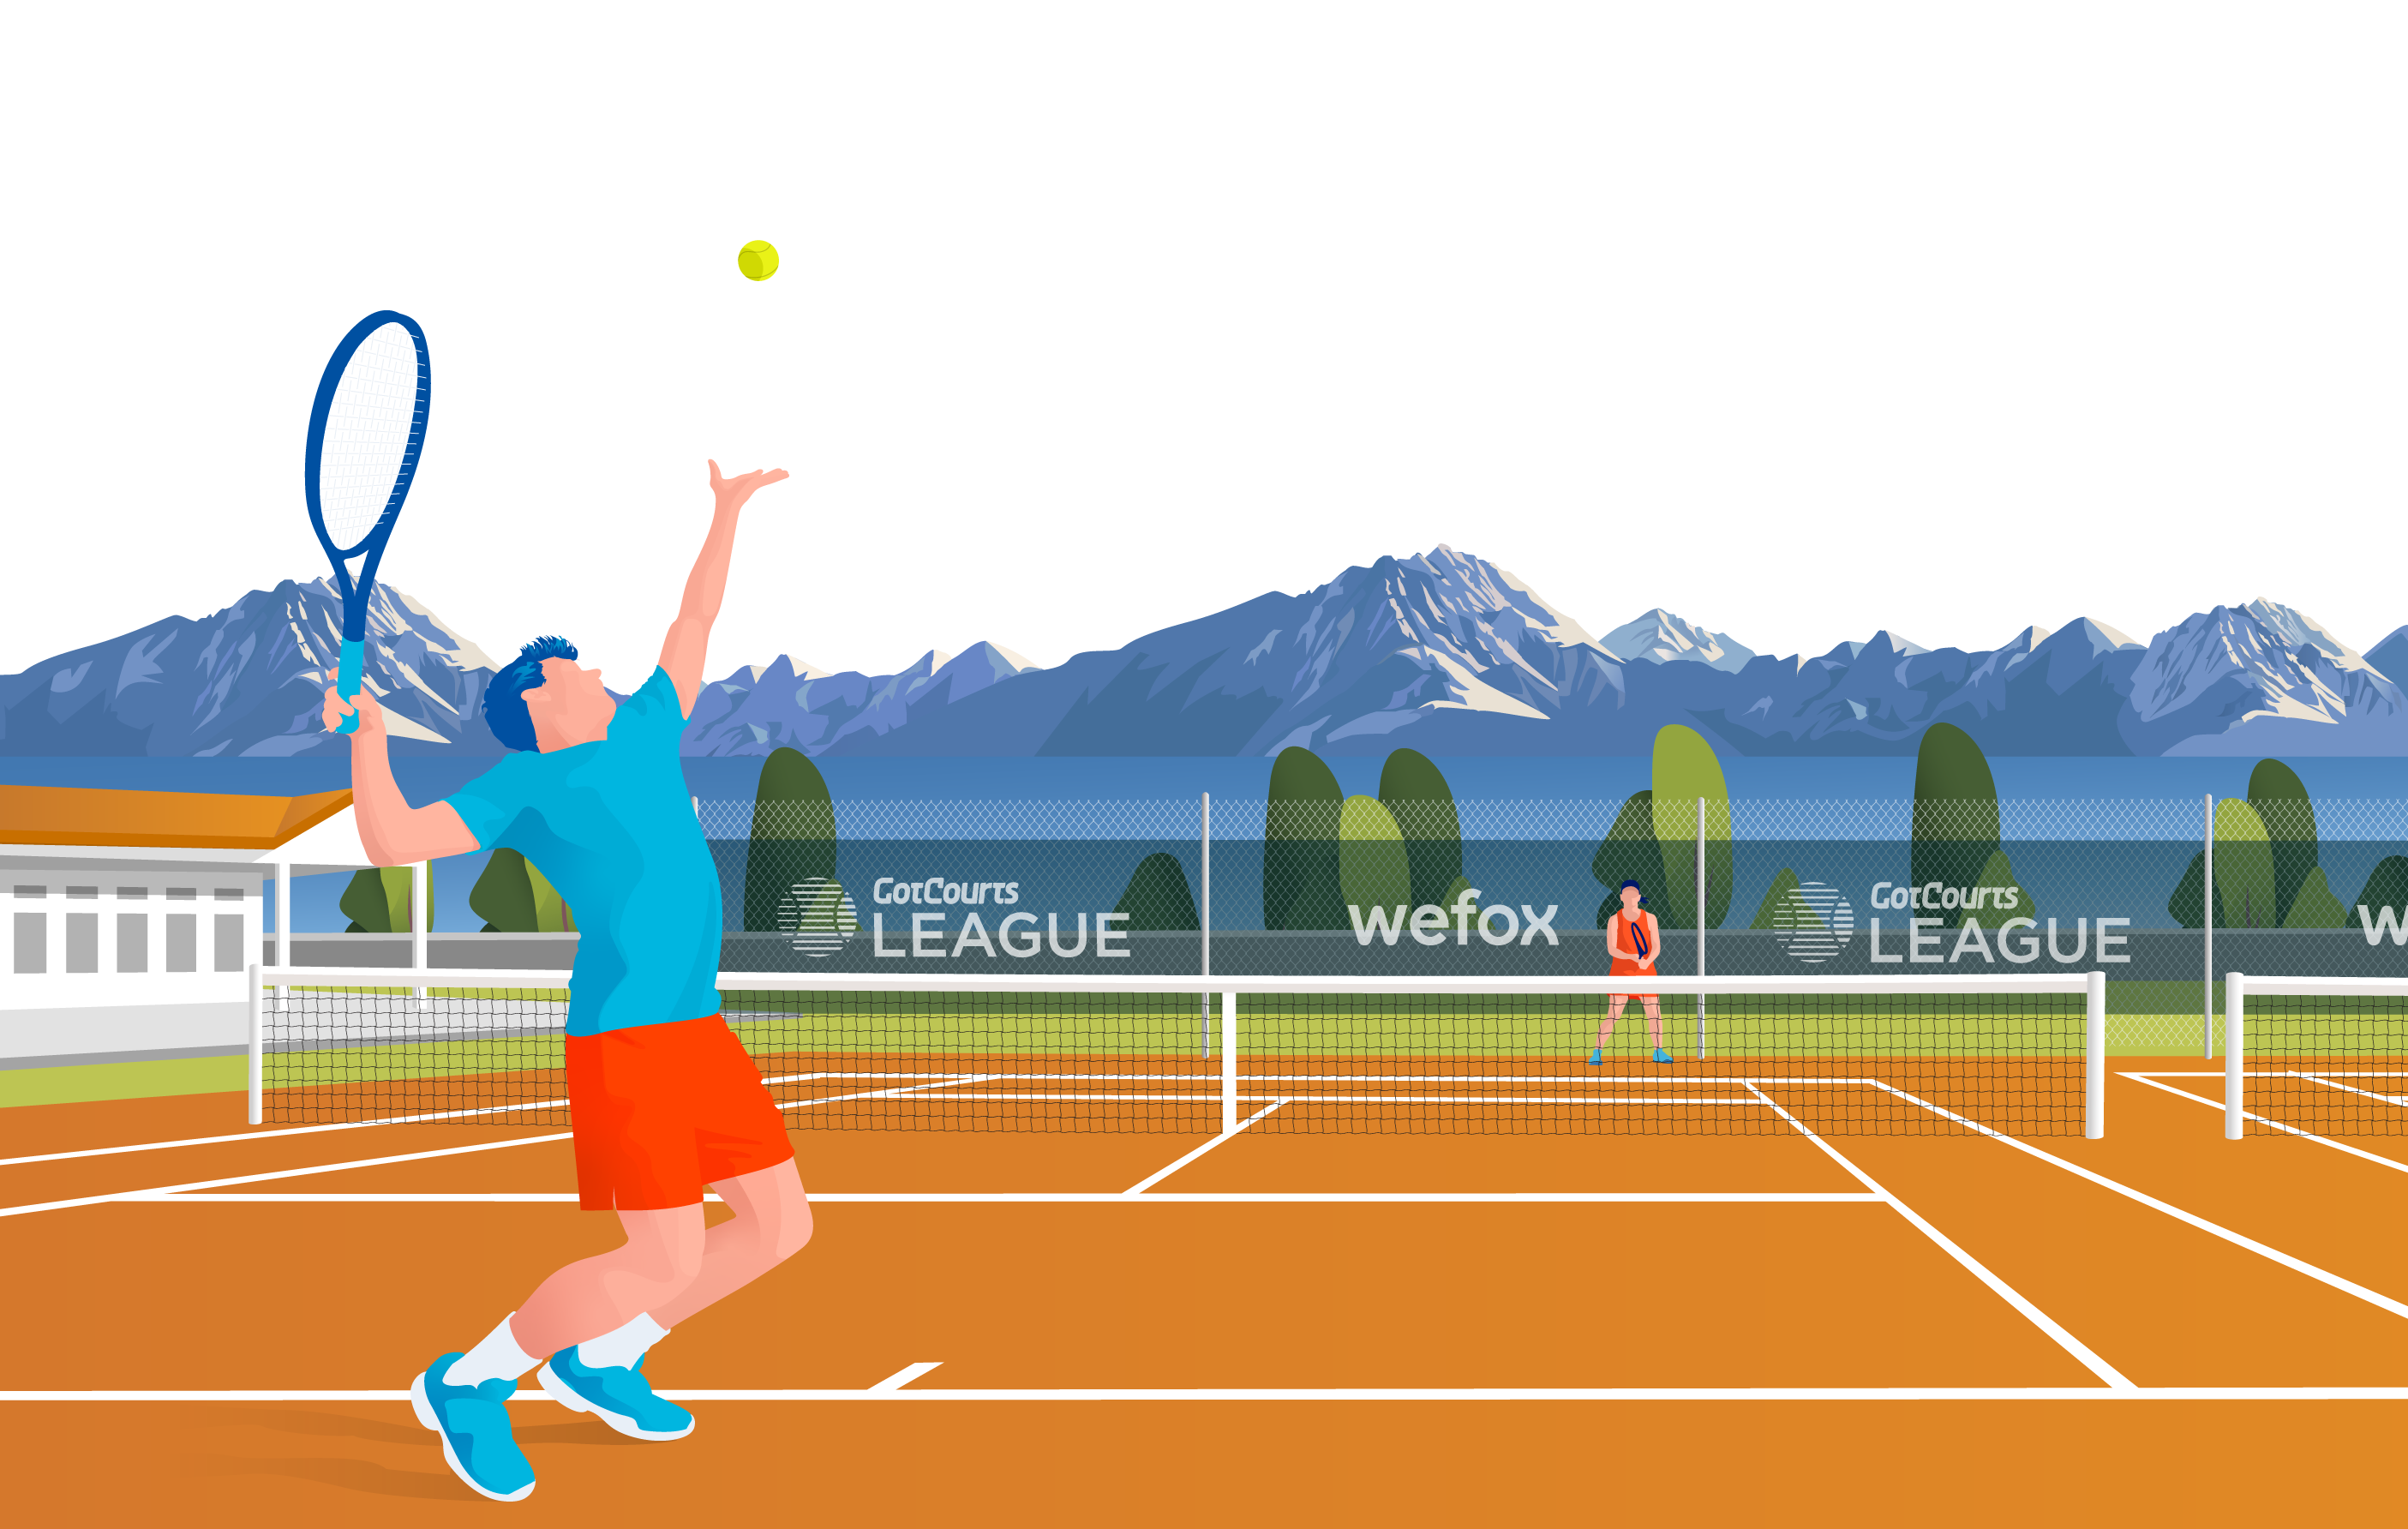 Illustration of tennis player serving with mountains background